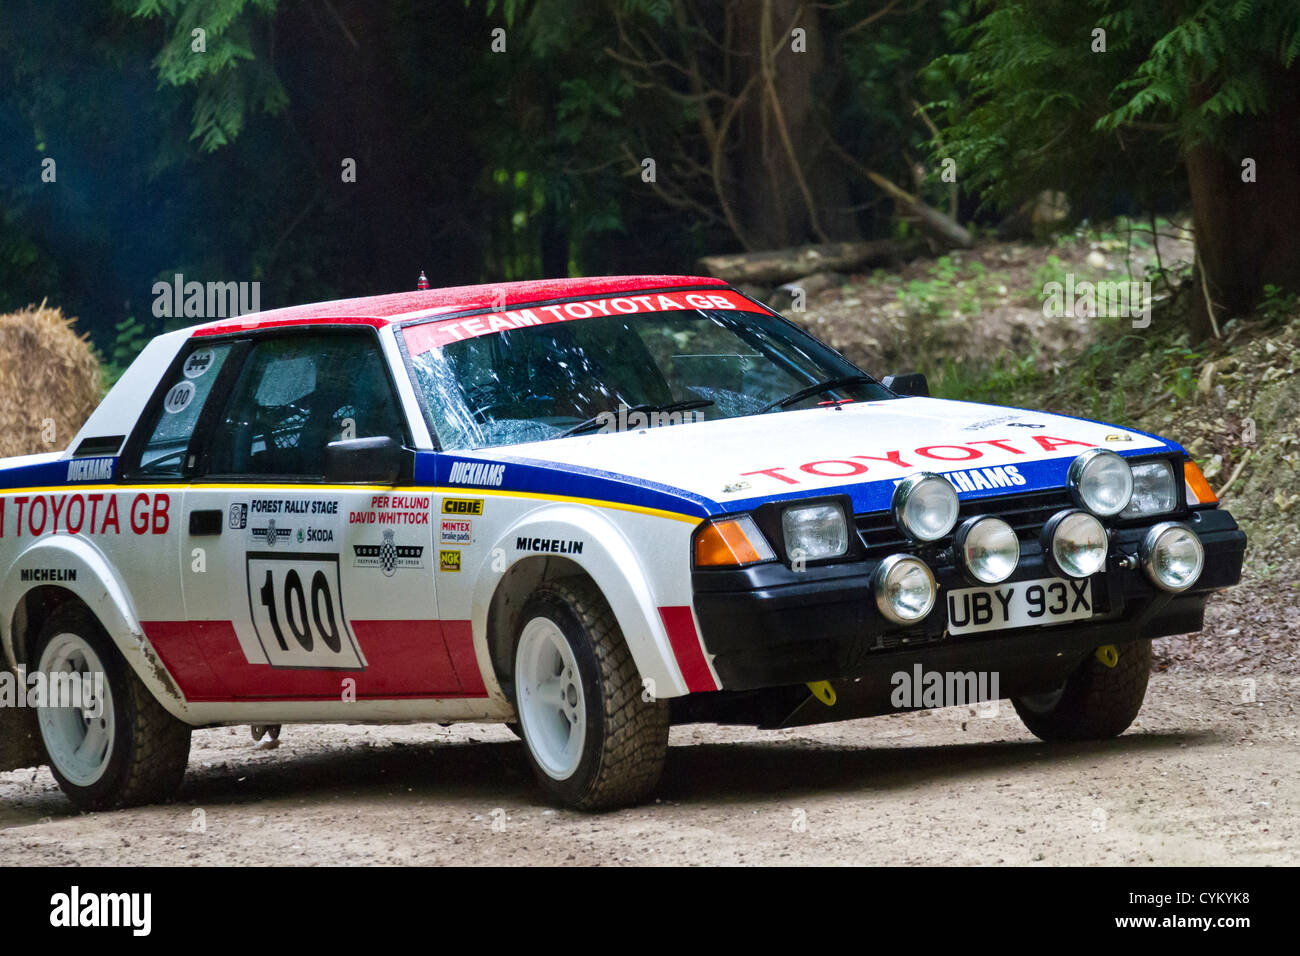 1981 Toyota Celica 2000GT Twin Cam with driver Jeffrey Lotts. 2012 Goodwood Festival of Speed, Sussex, UK. Stock Photo